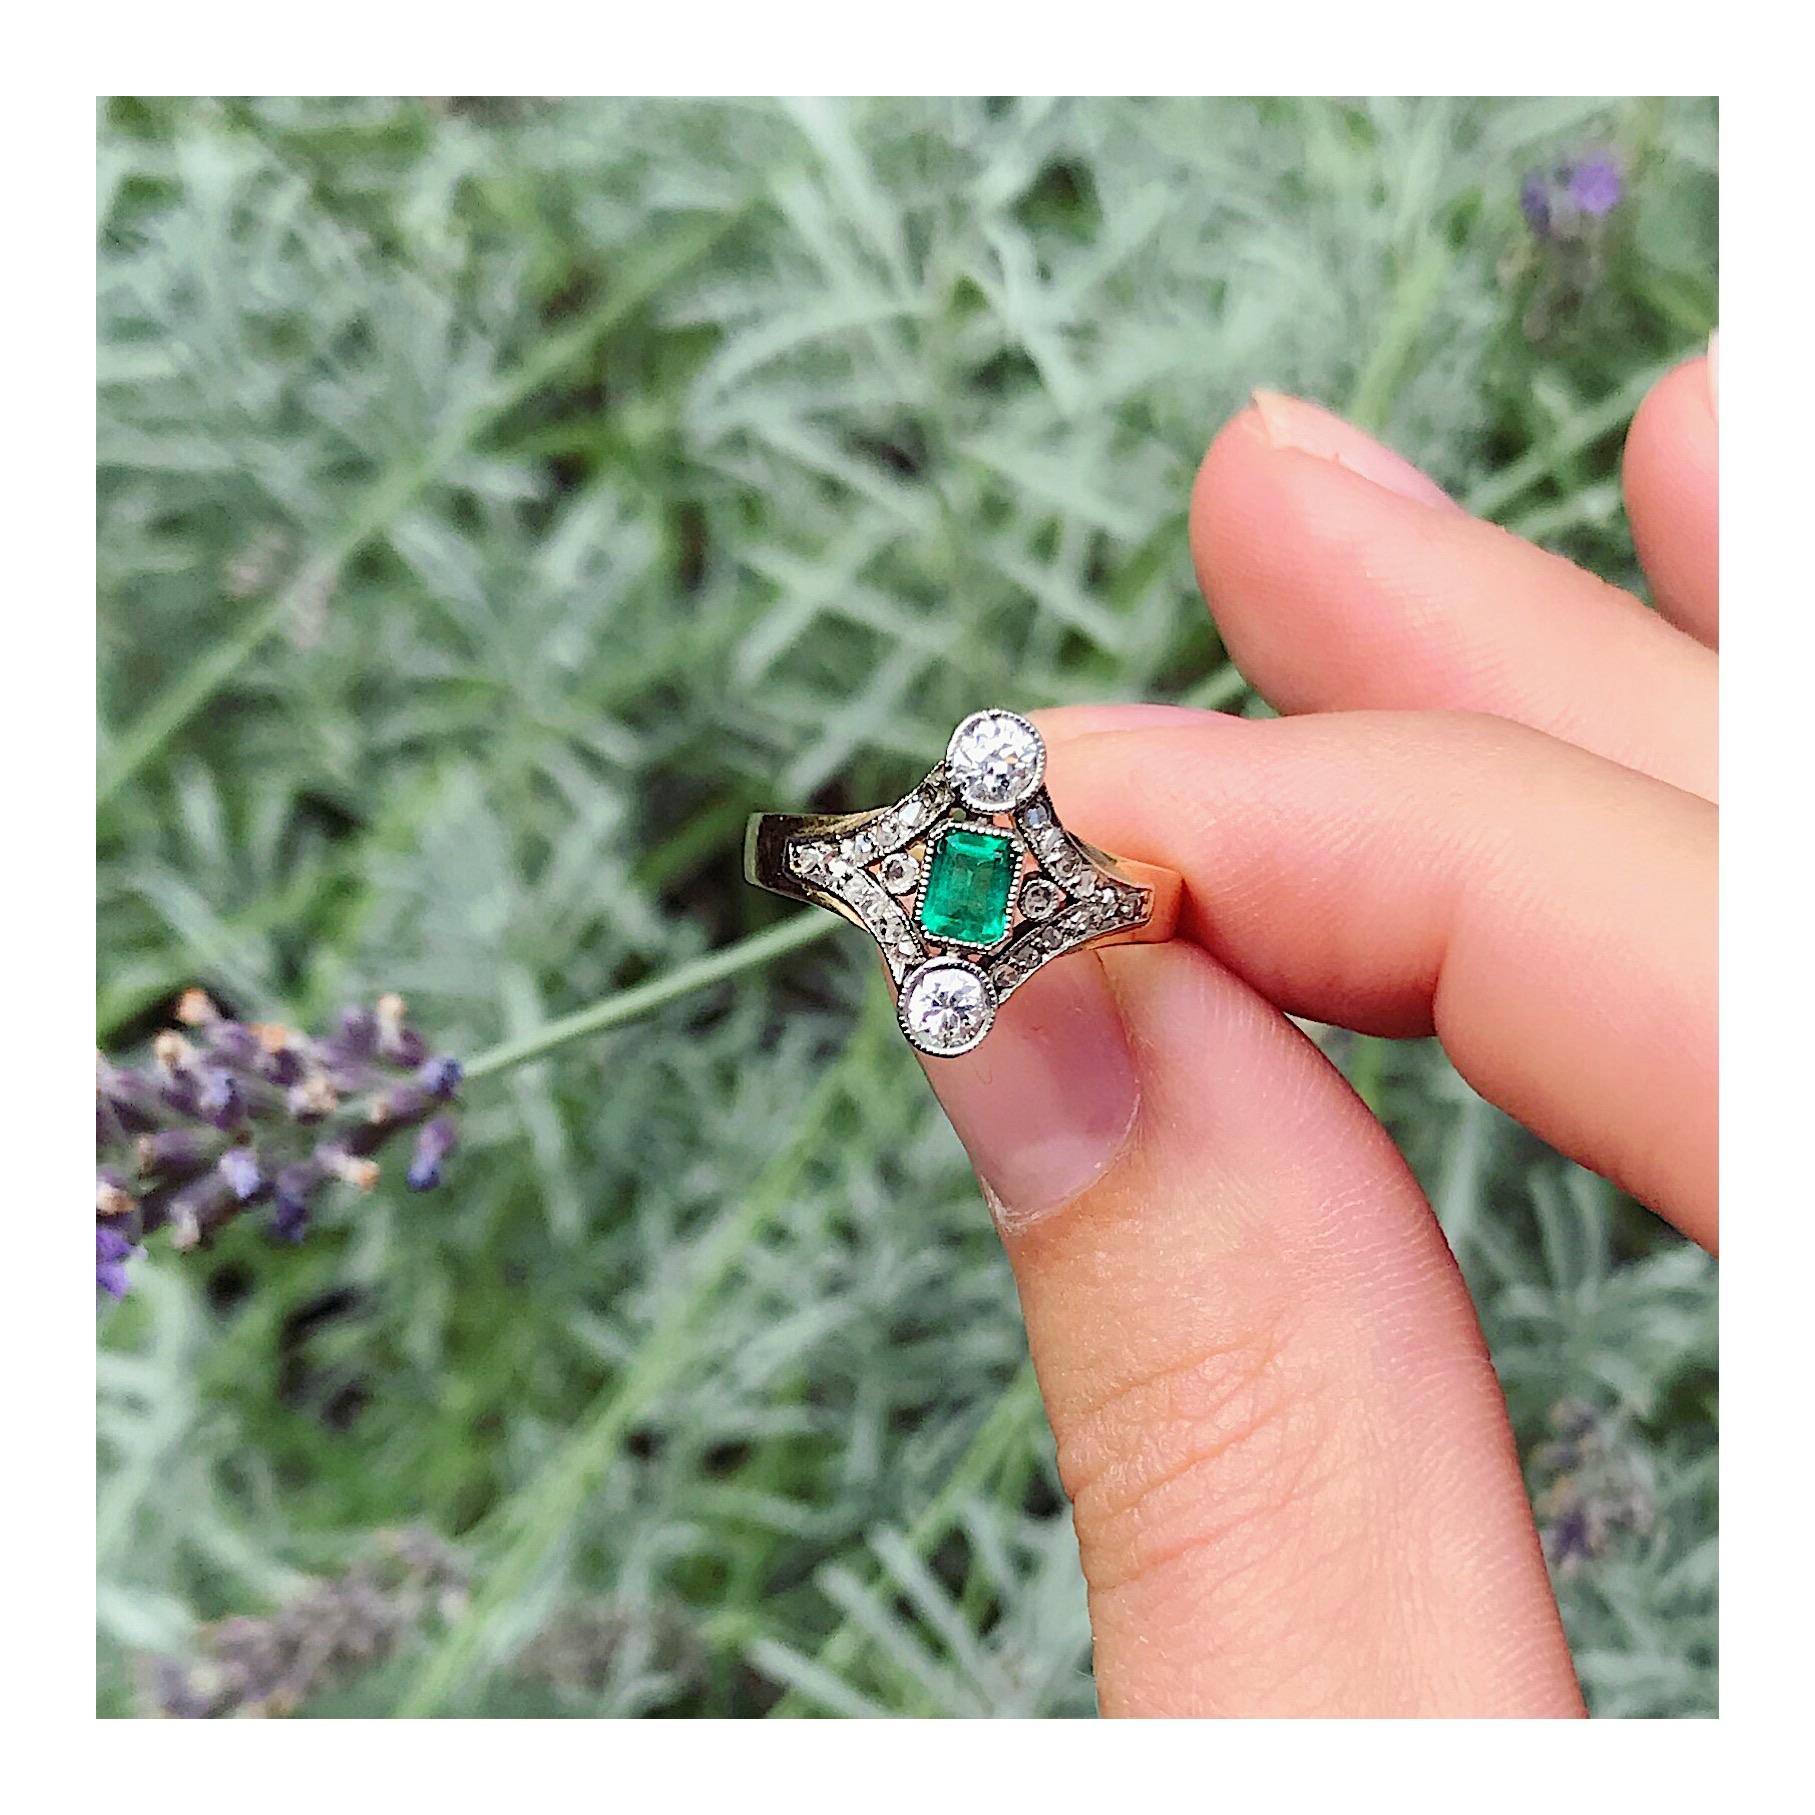 Through the rectangular cut verdant emerald in a vertical sequence between two old European cut diamonds, this 14K yellow gold Late-Victorian ring from 1900 shows the star alignment of any union meant to be. A row of rose cut diamonds sprouts from